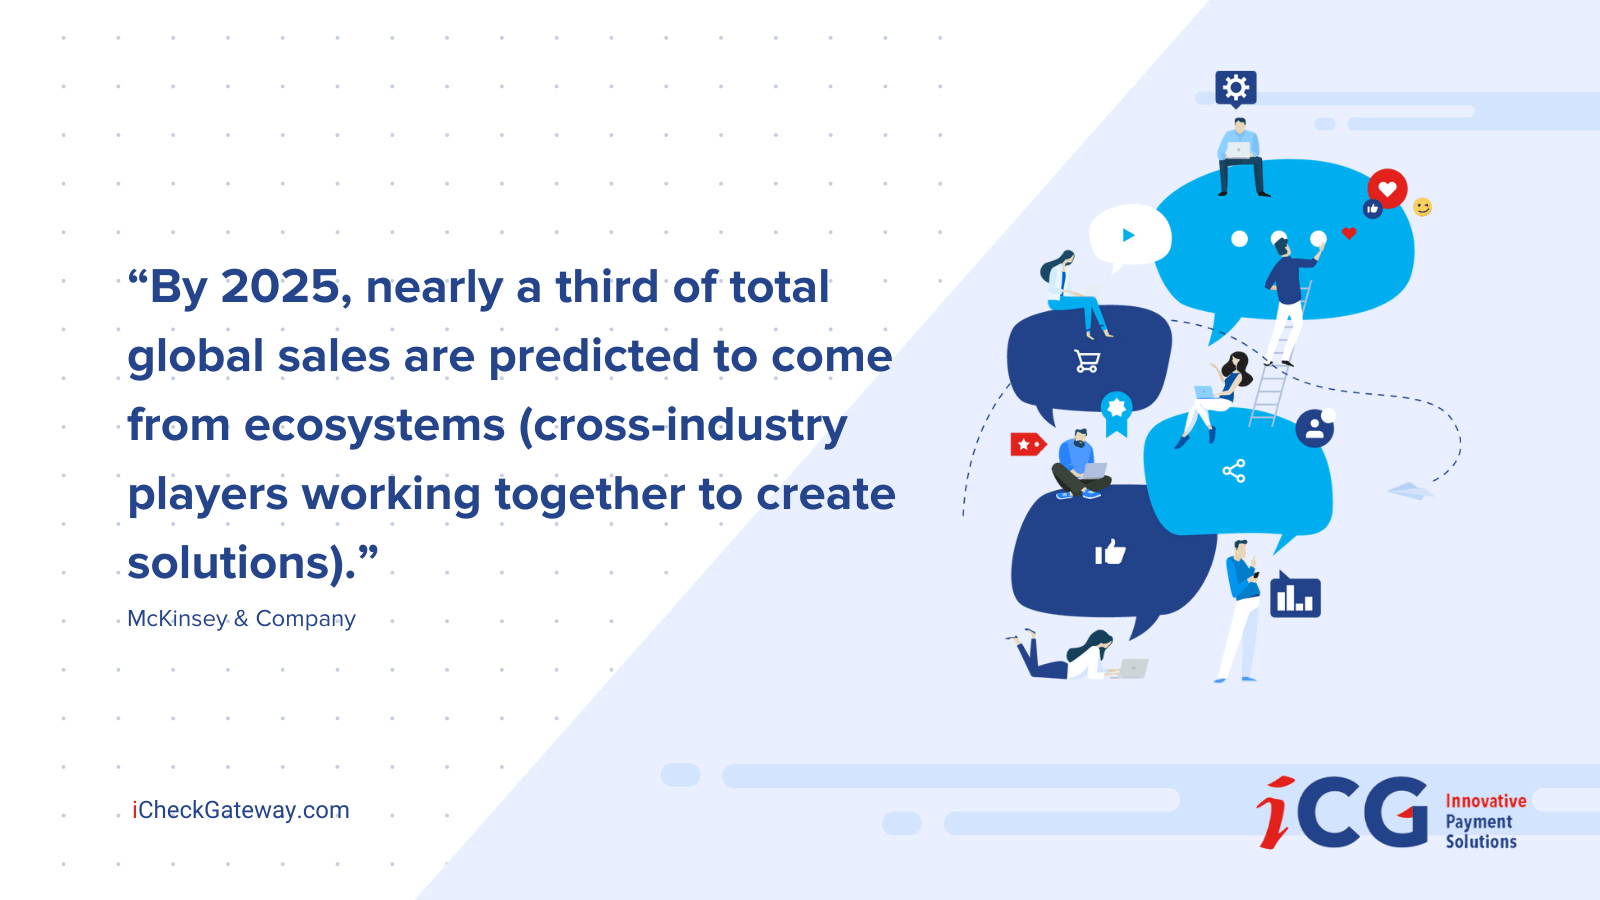 “By 2025, nearly a third of total global sales are predicted to come from ecosystems (cross-industry players working together to create solutions).”